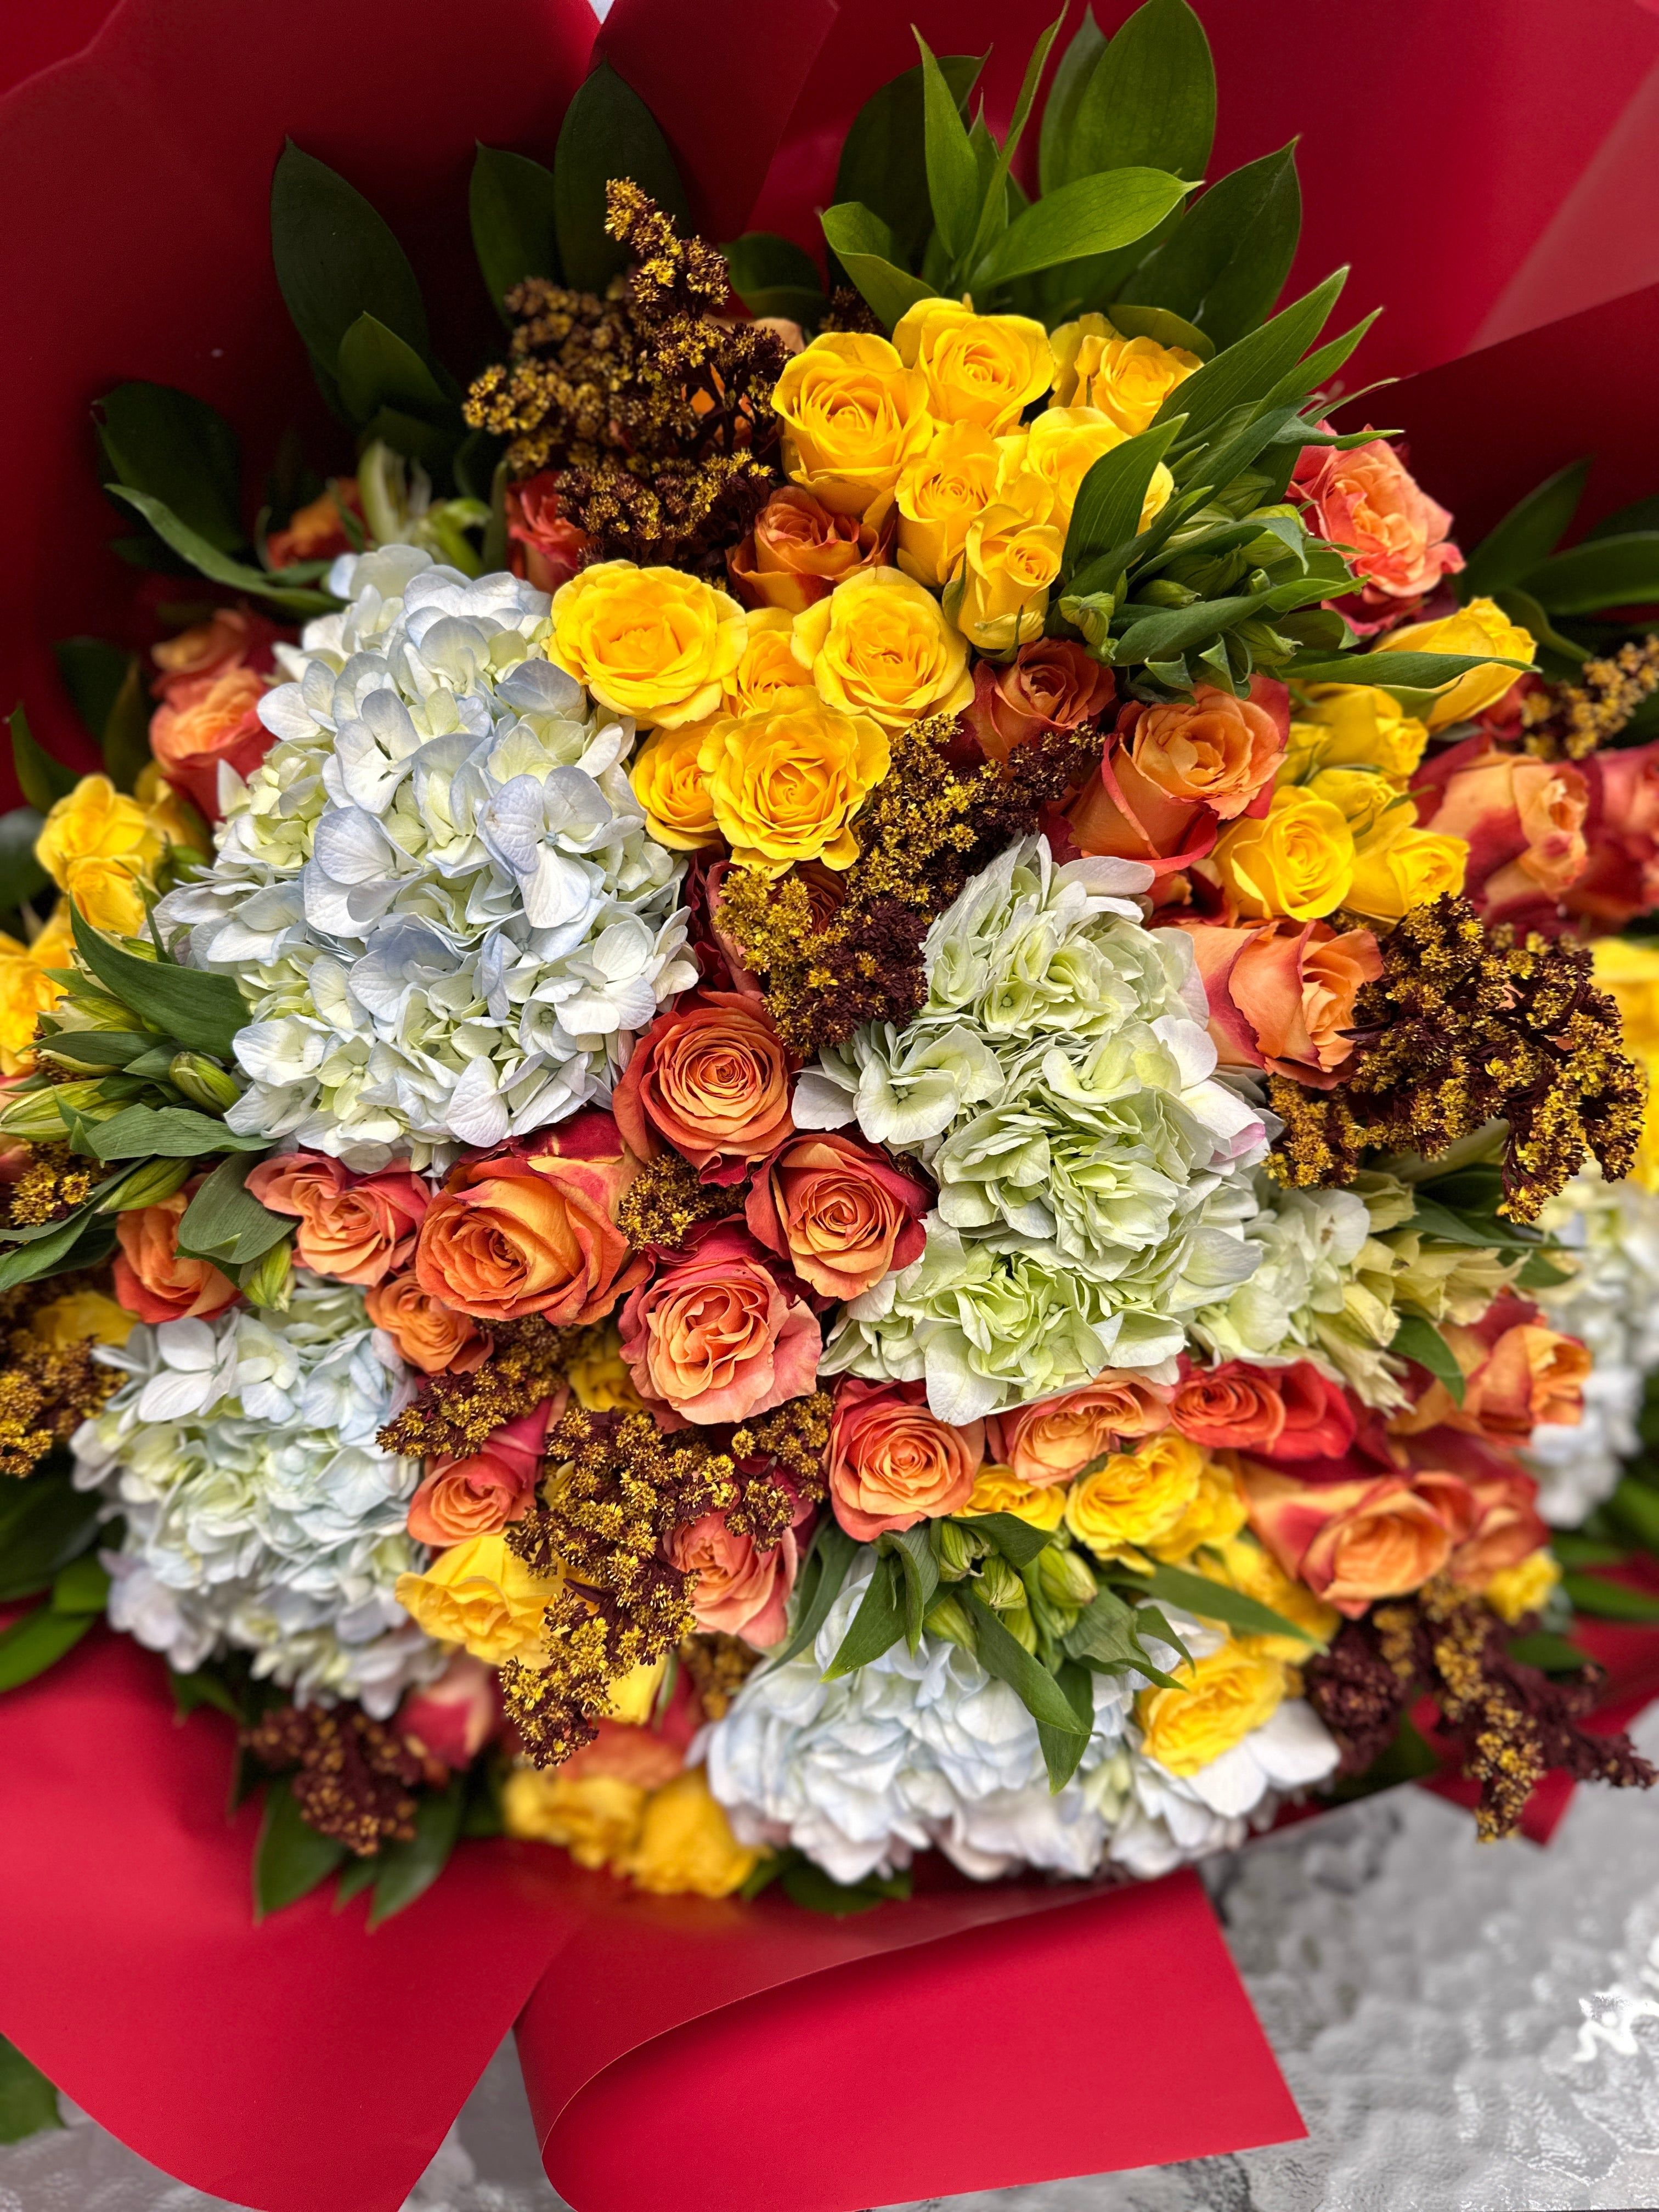 Glendale Florist Ca-With 75 vibrant yellow and orange roses, this deluxe bouquet